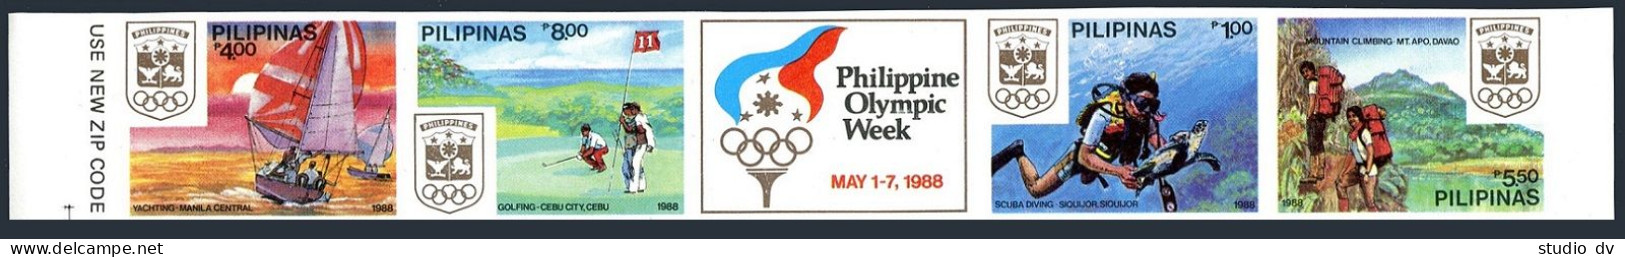 Philippines 1938a Strips Perf,imperf,MNH.Olympic Week 1988.Scuba Diving,Yachting - Philippinen